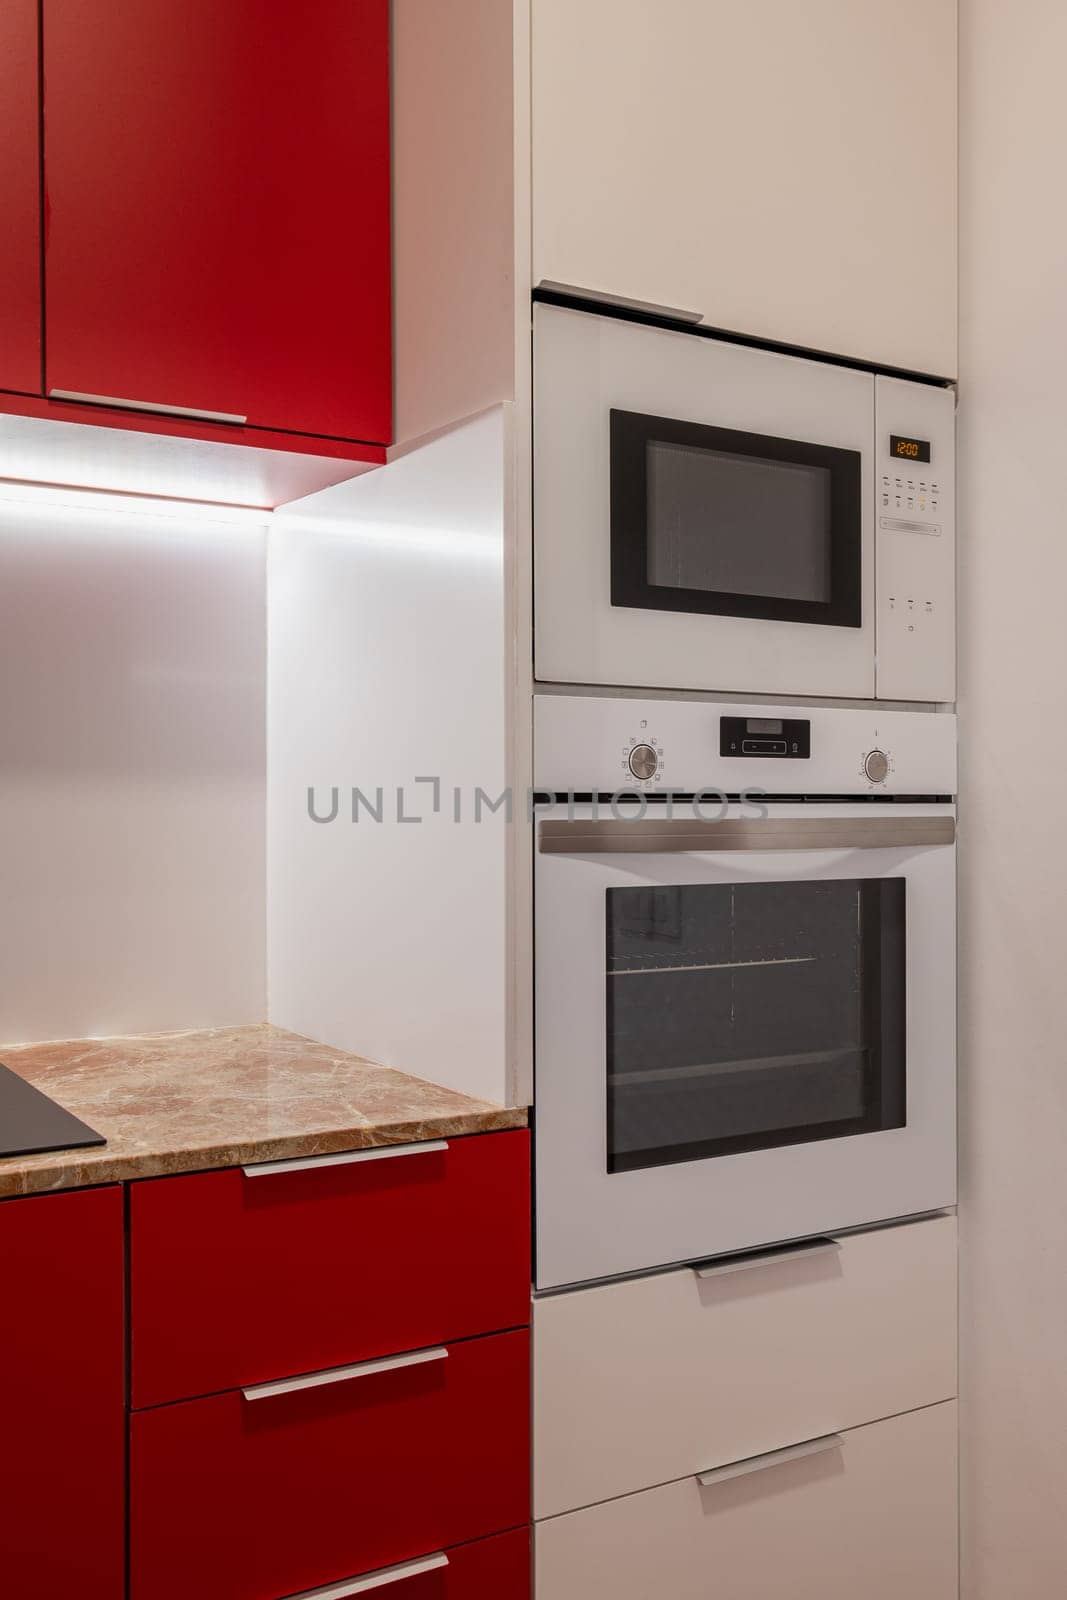 Close-up view of a modern kitchen's integrated appliances, including a microwave and oven set into white cabinetry.